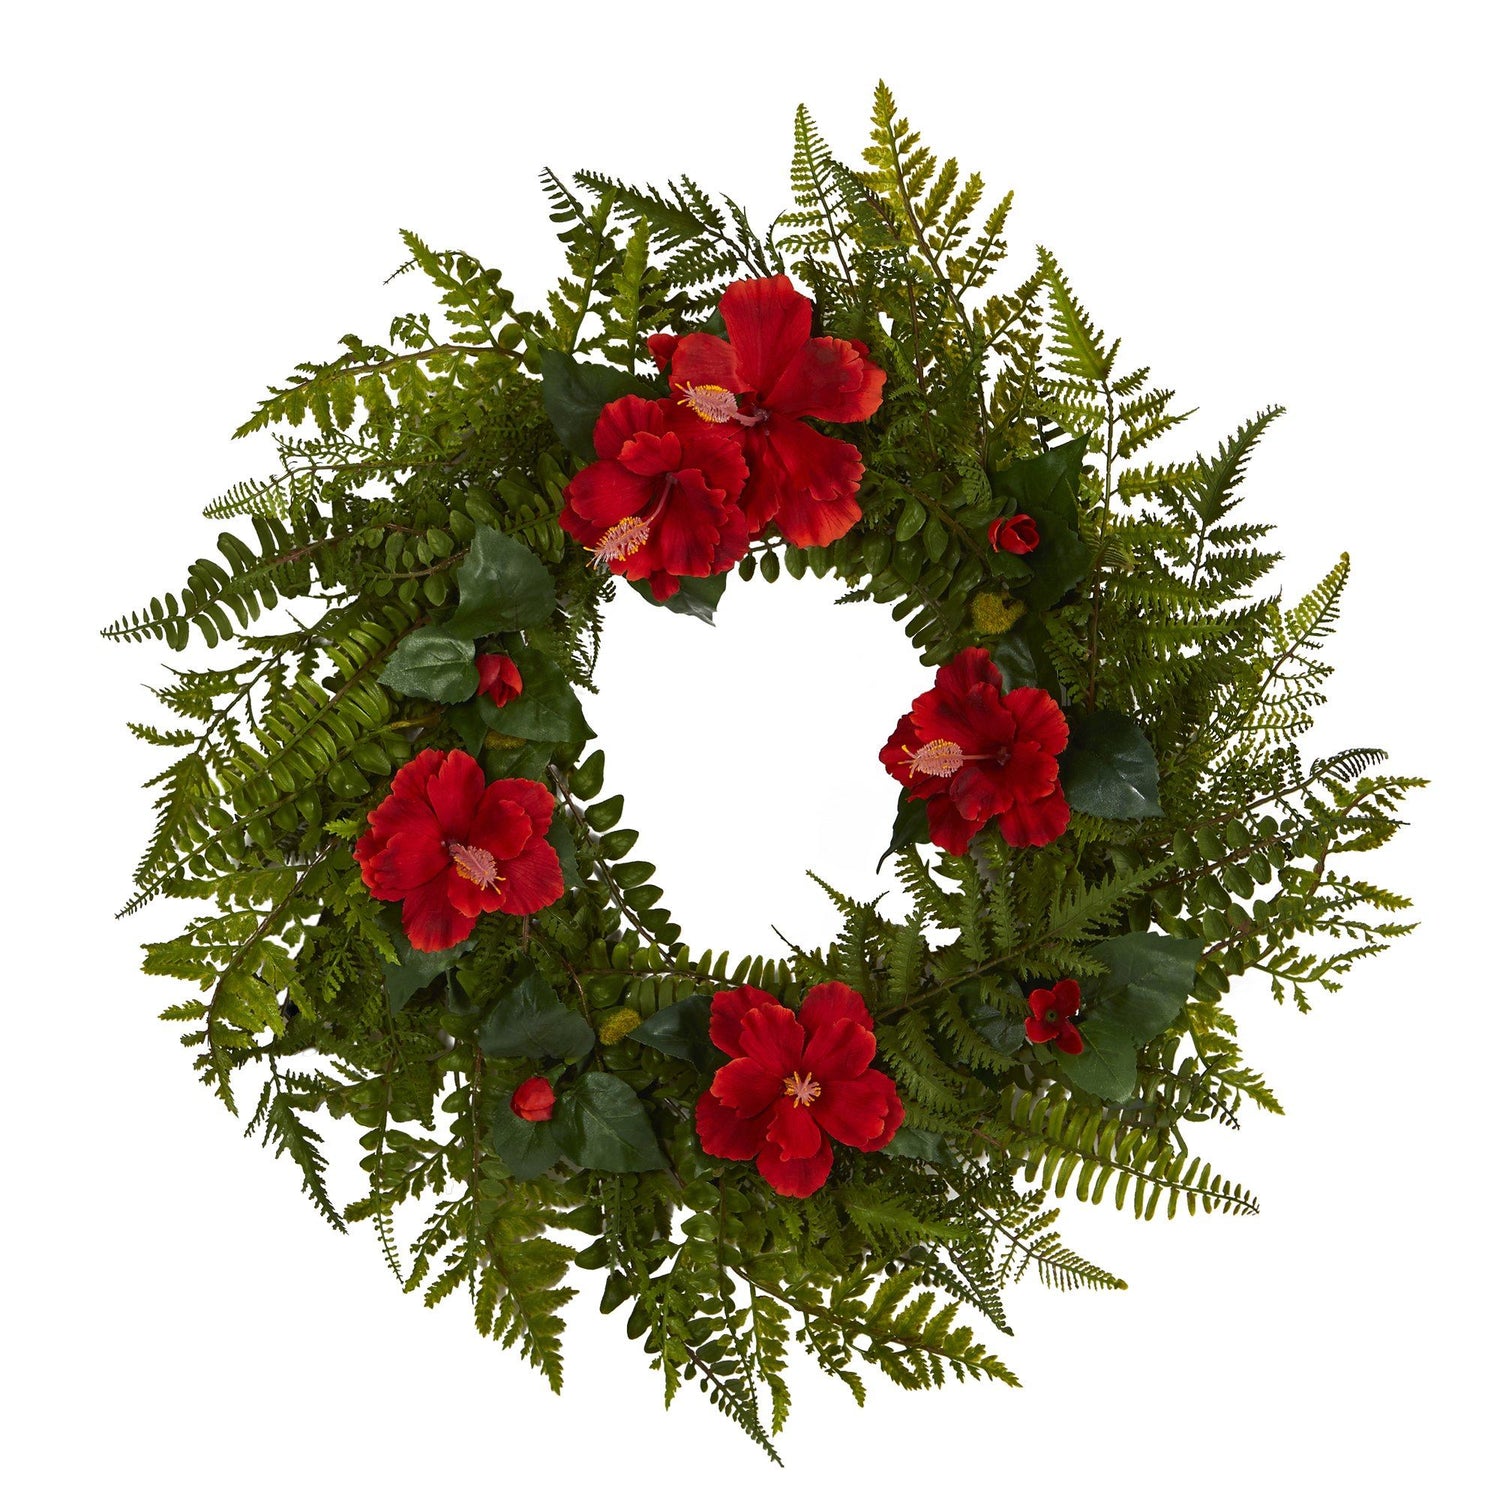 24” Mixed Fern and Hibiscus Artificial Wreath